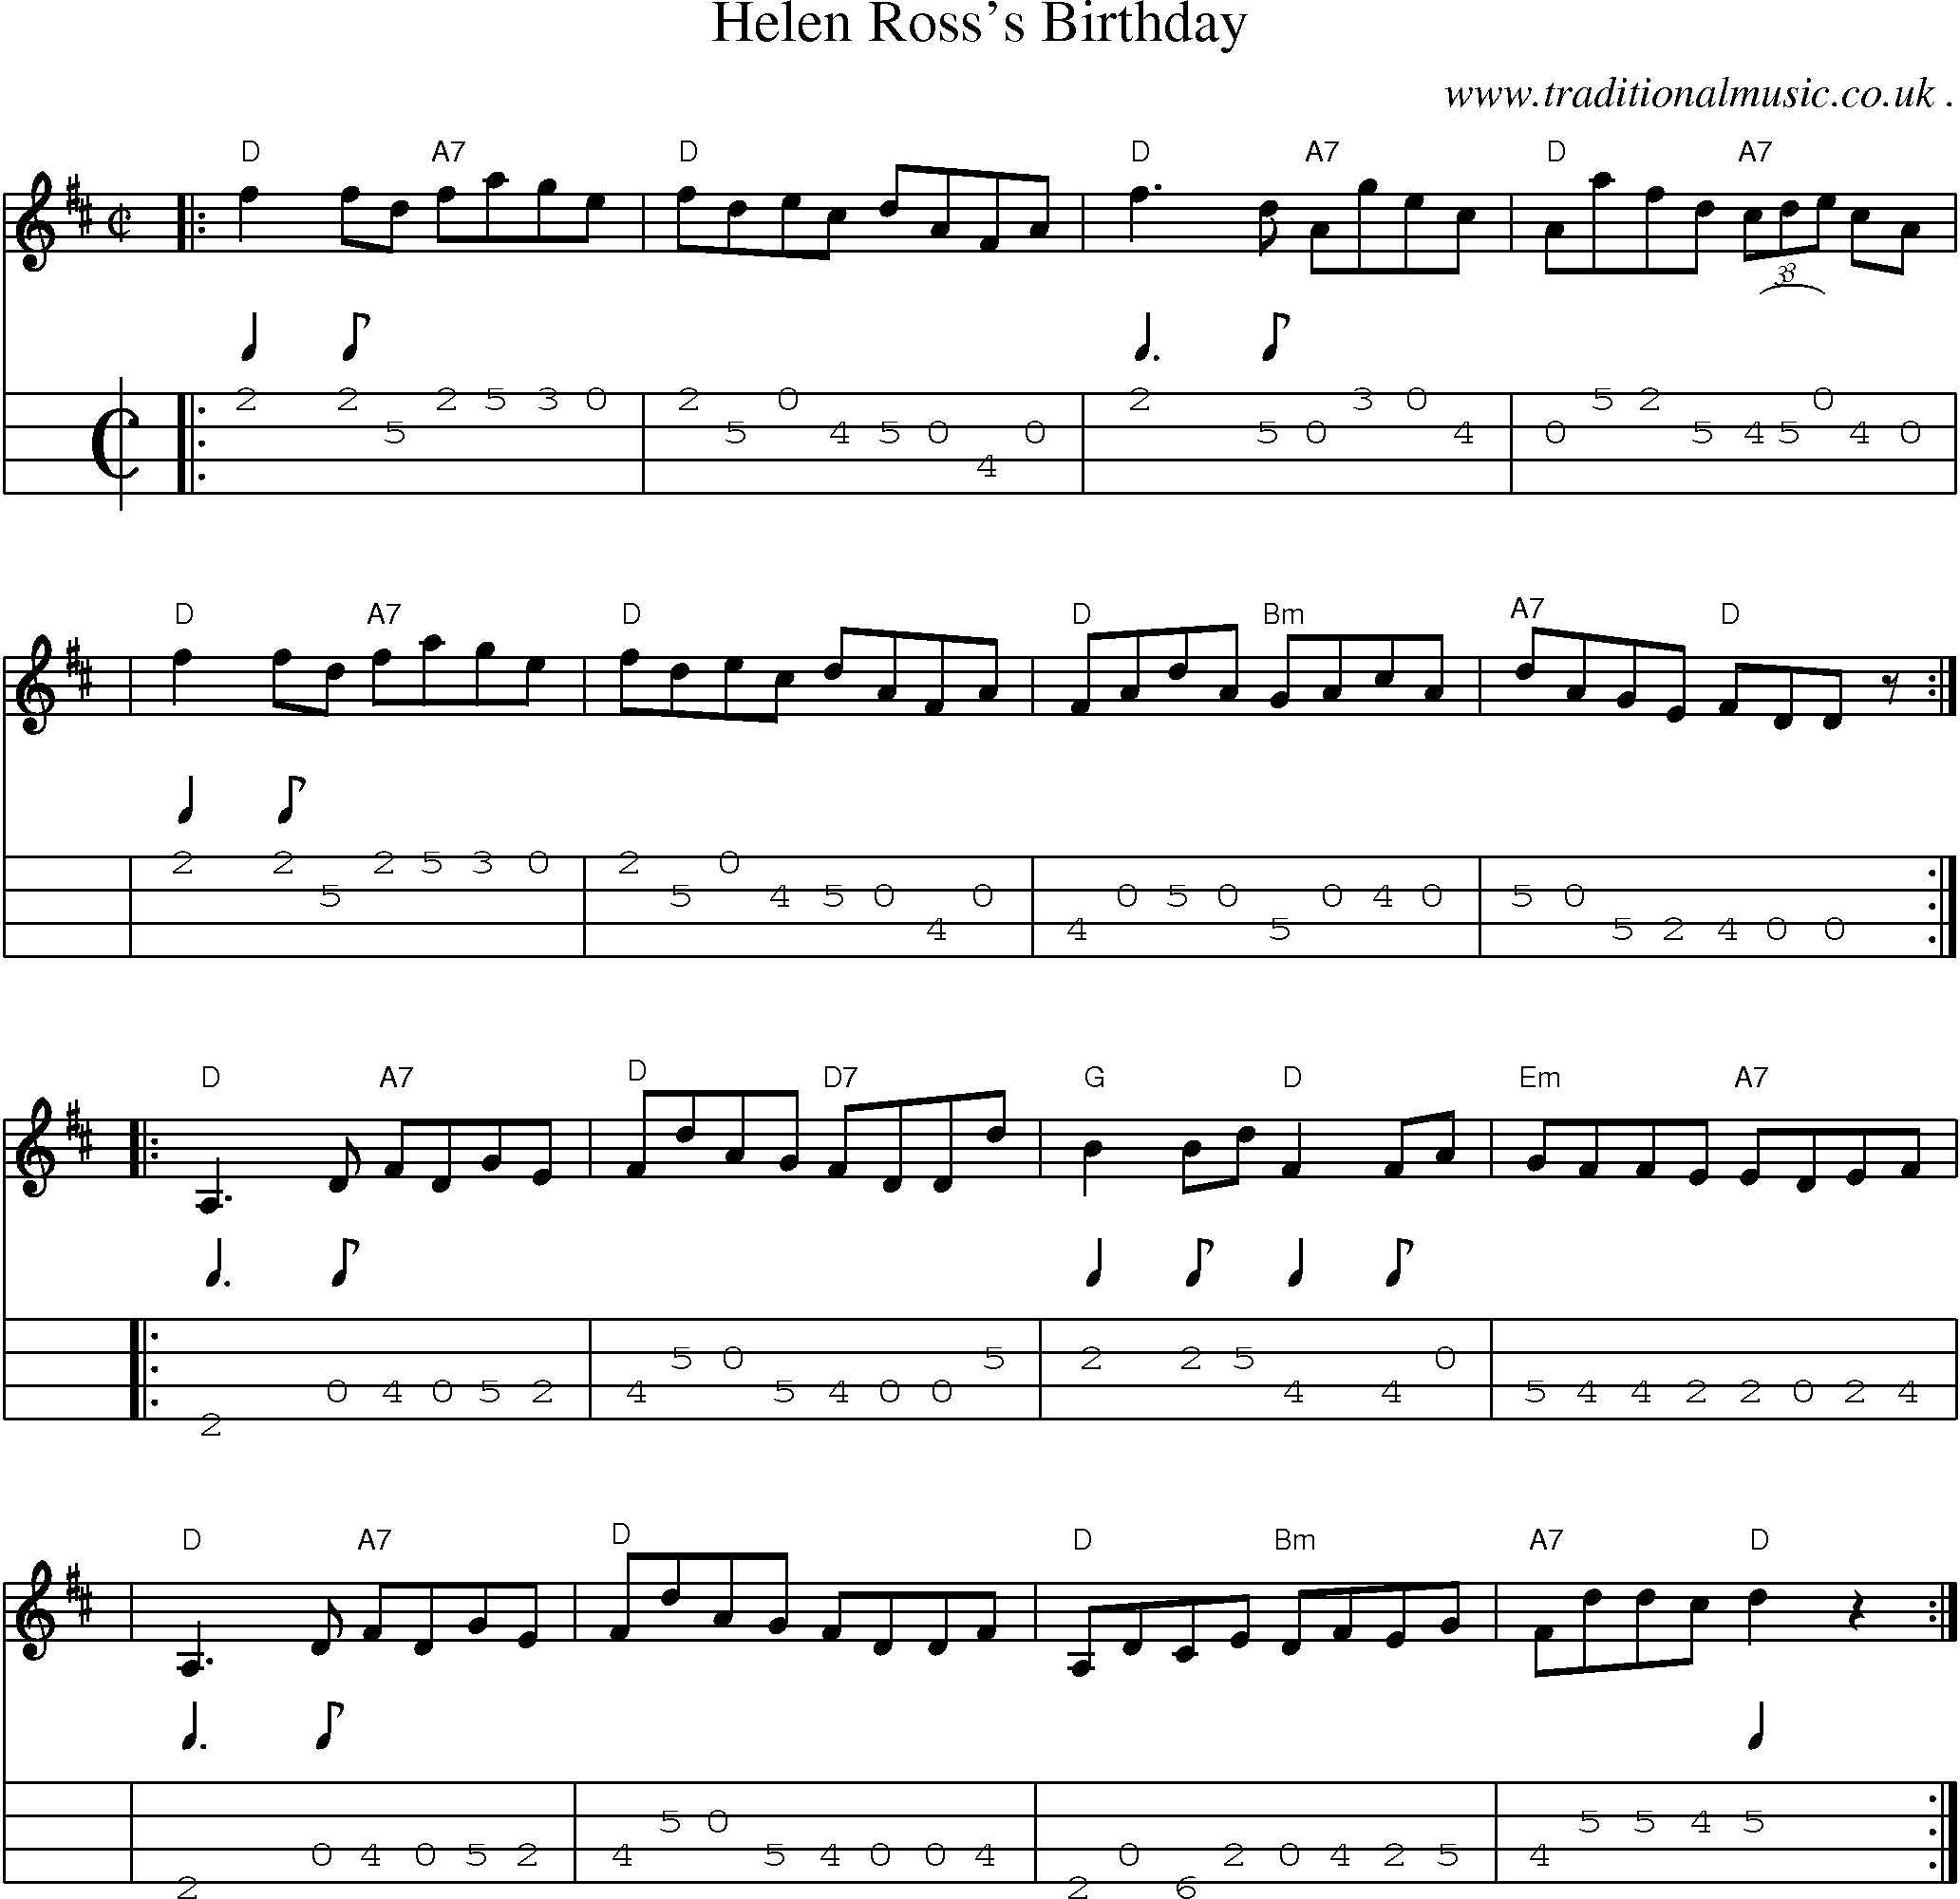 Sheet-music  score, Chords and Mandolin Tabs for Helen Rosss Birthday